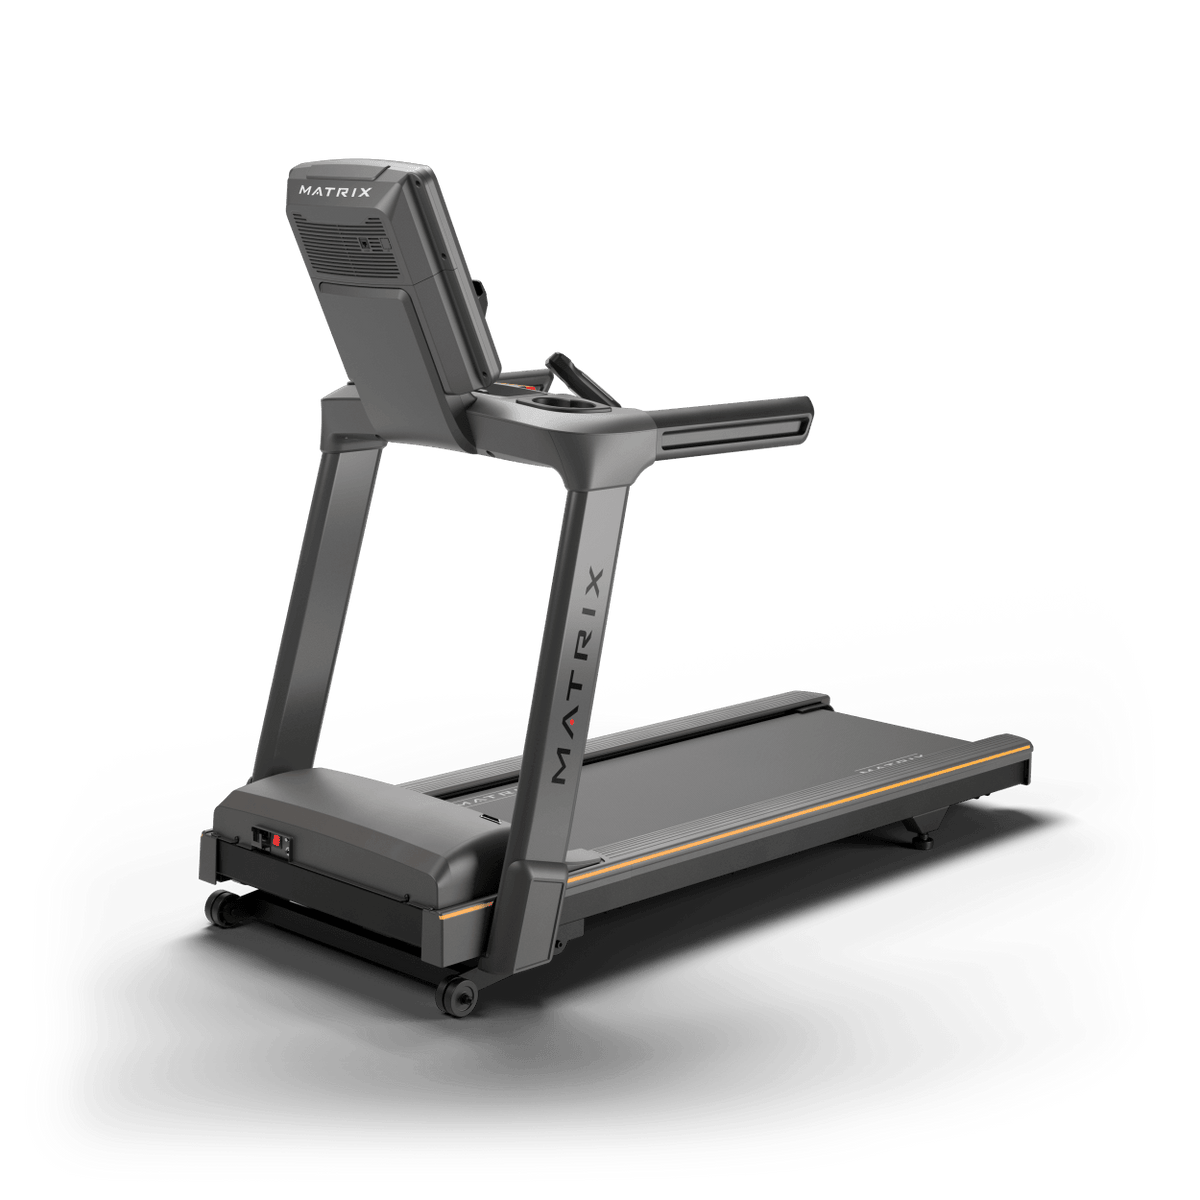 Matrix Fitness Lifestyle Treadmill with LED Console rear view | Fitness Experience